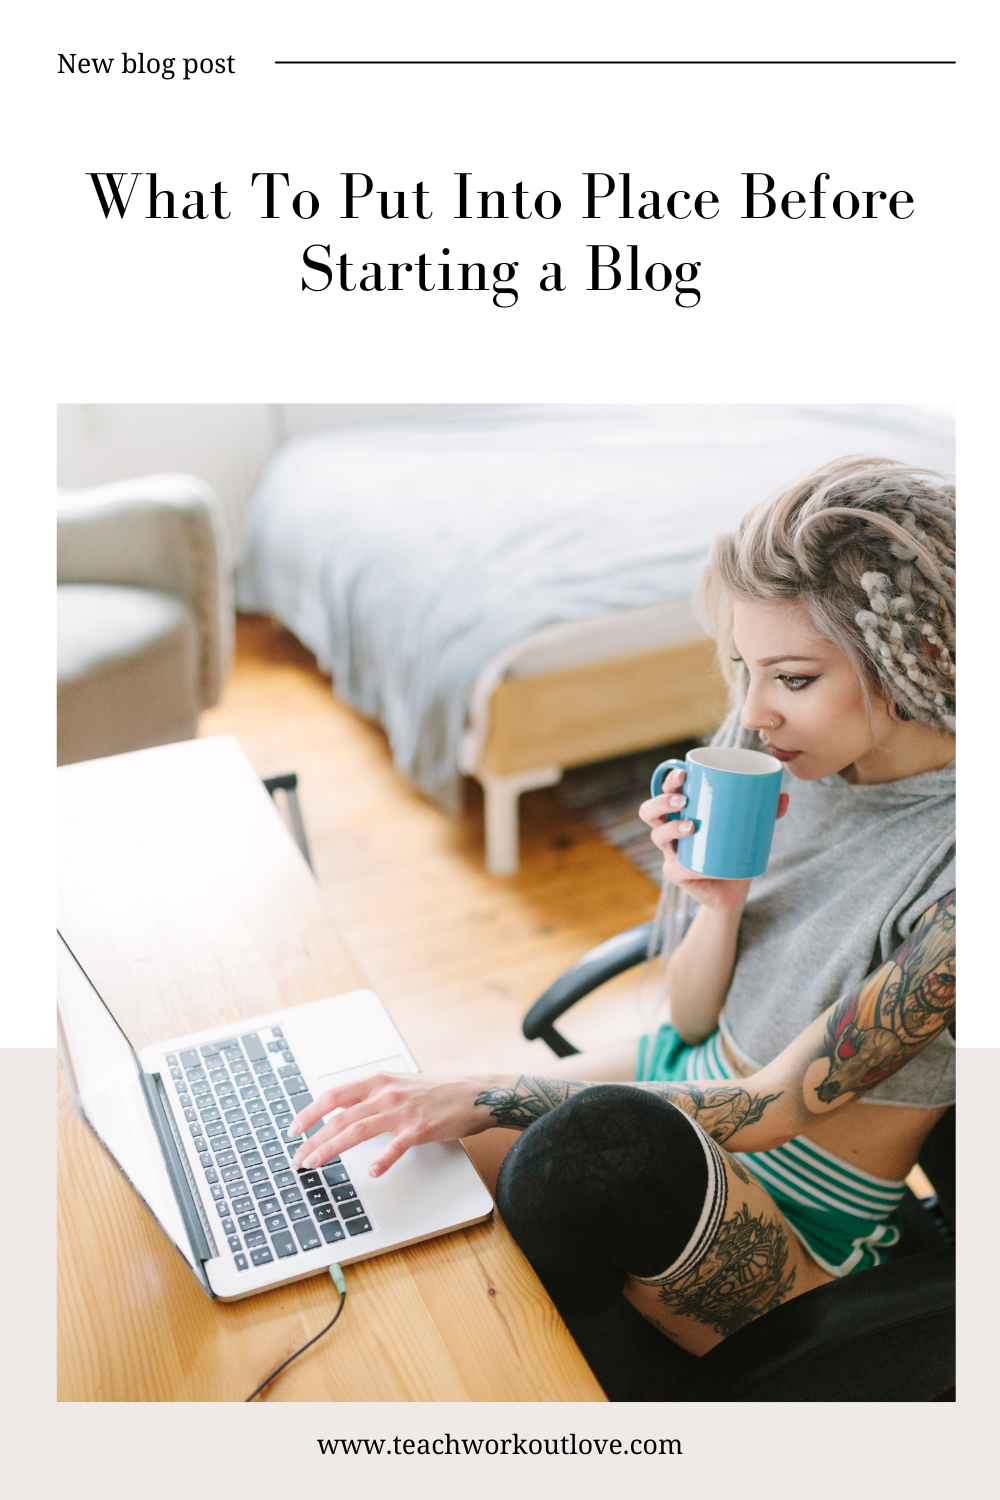 if you want to get ready and learn about what you need to have in place before you start your blog, read on now and learn more.